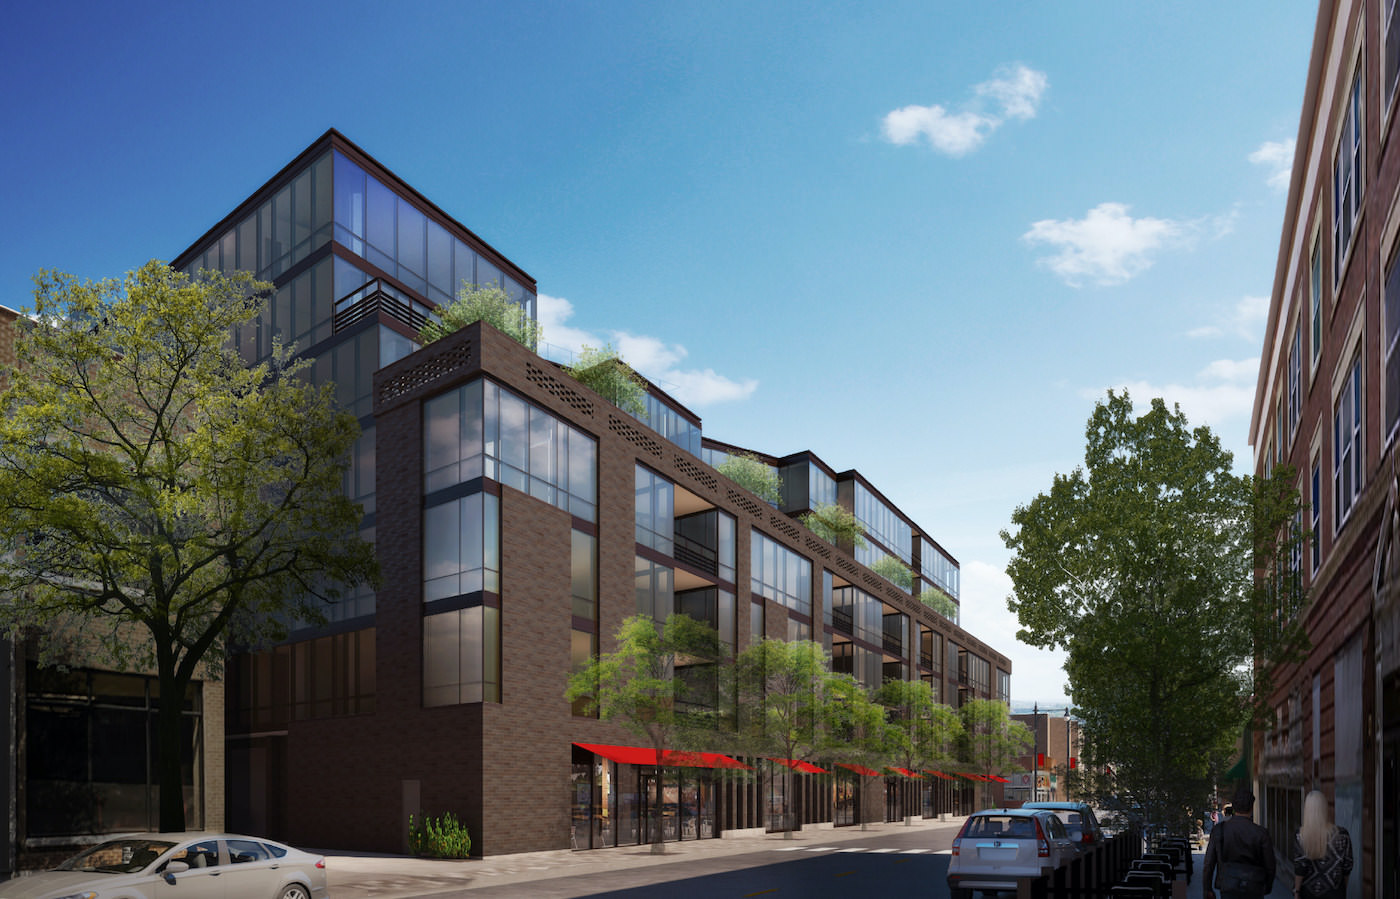 Optima Lakeview, our latest project to break ground in 2020.